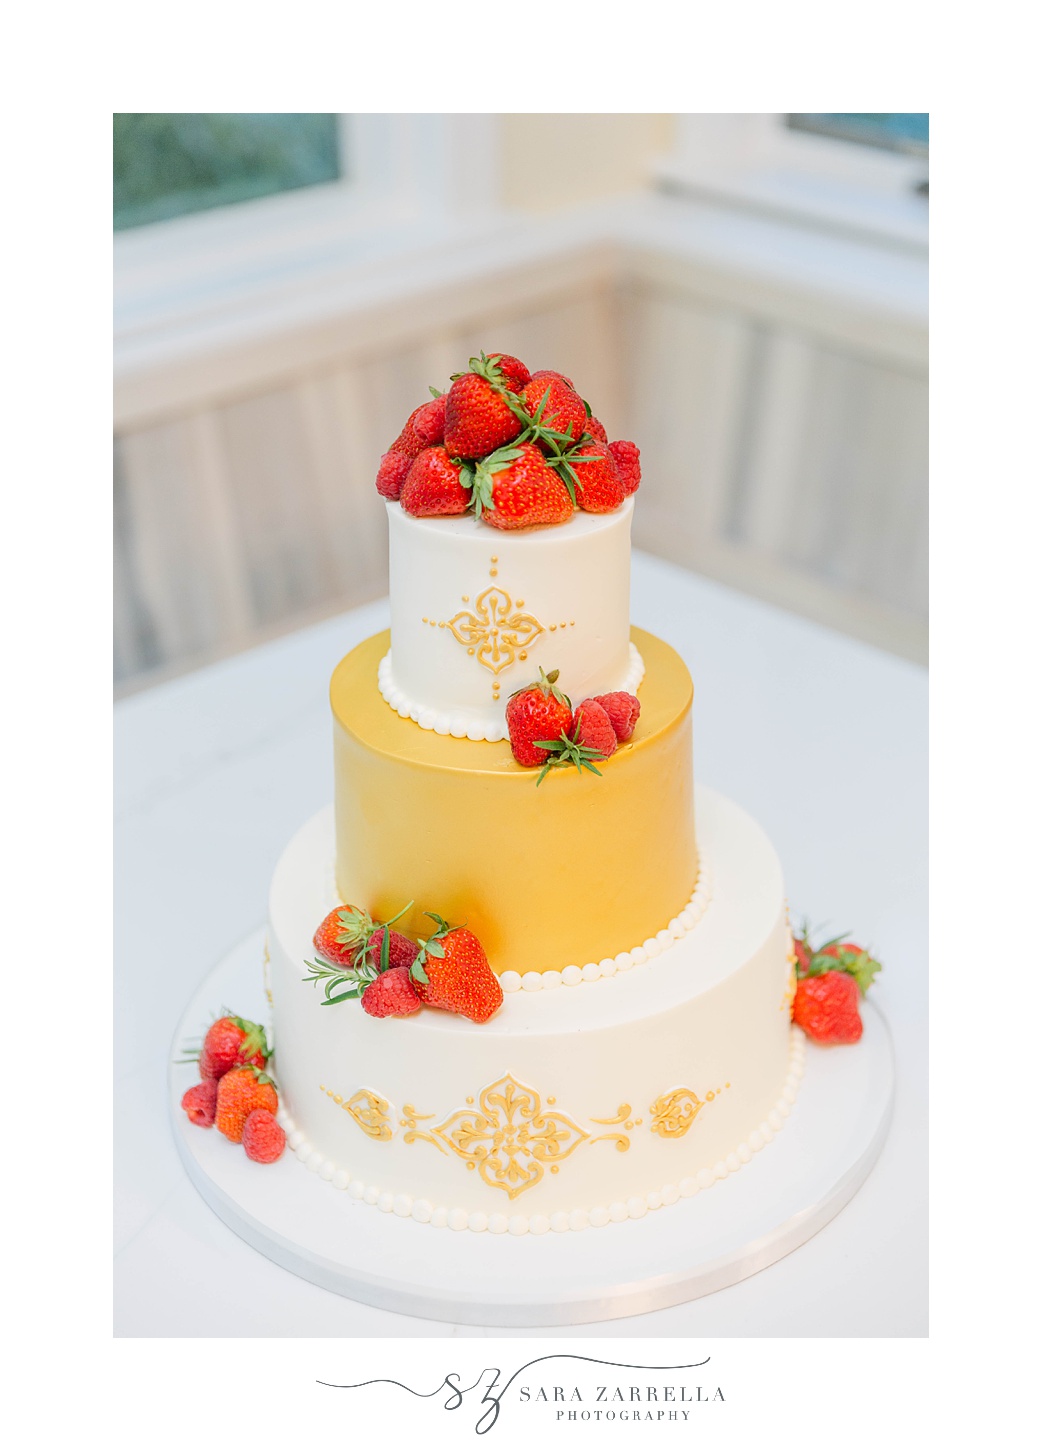 tiered wedding cake with gold and white icing and strawberries 